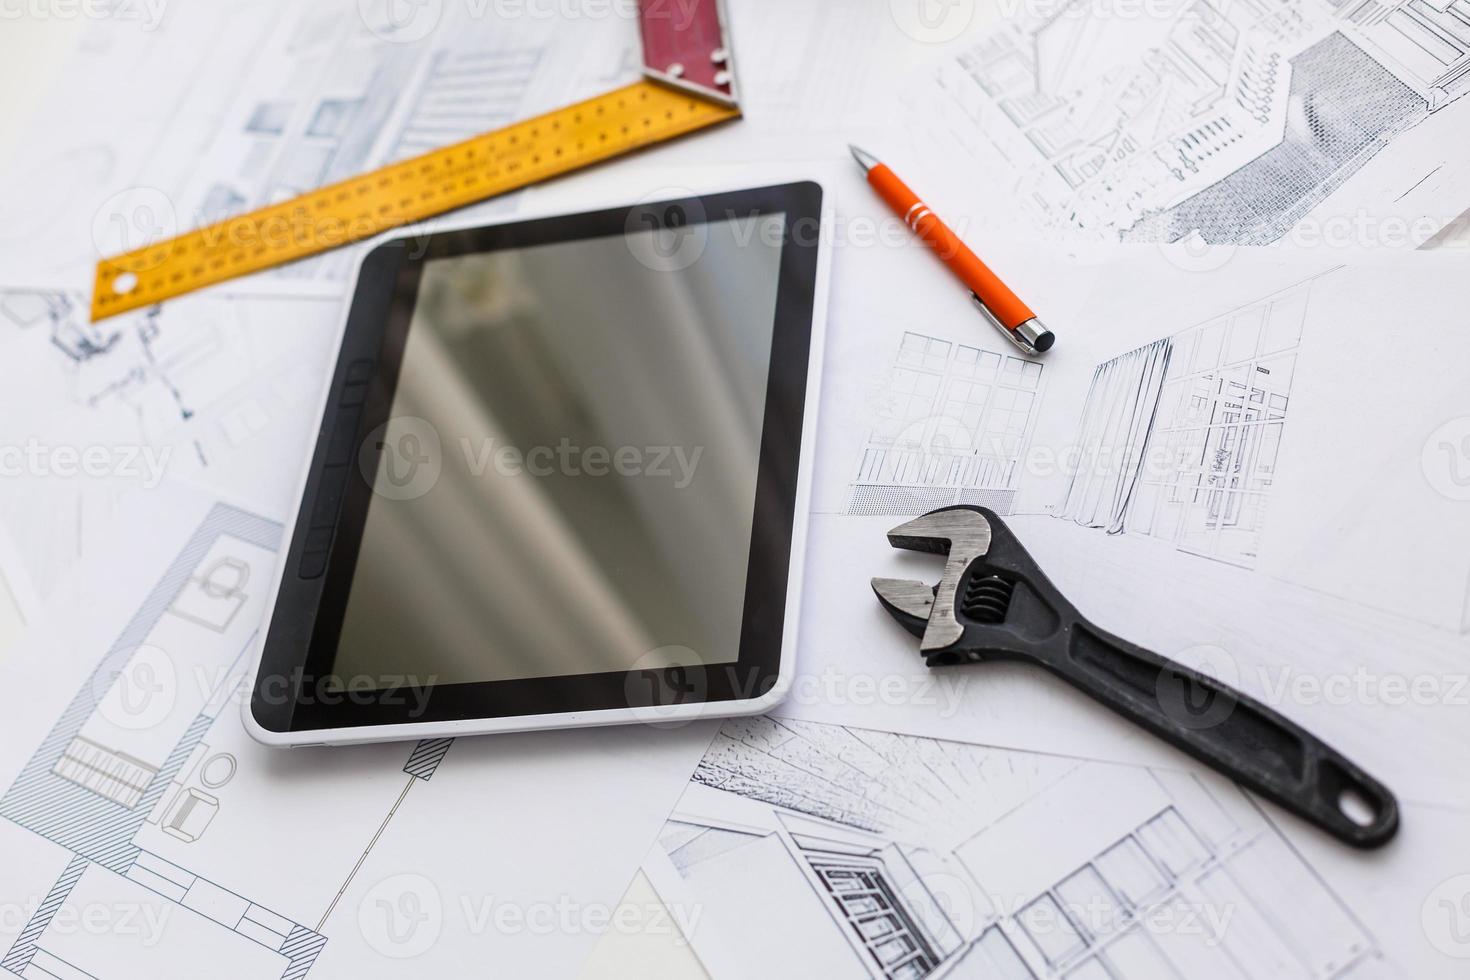 Computer Tablet with Master Bathroom Design Over House Plans, Pencil and Compass photo